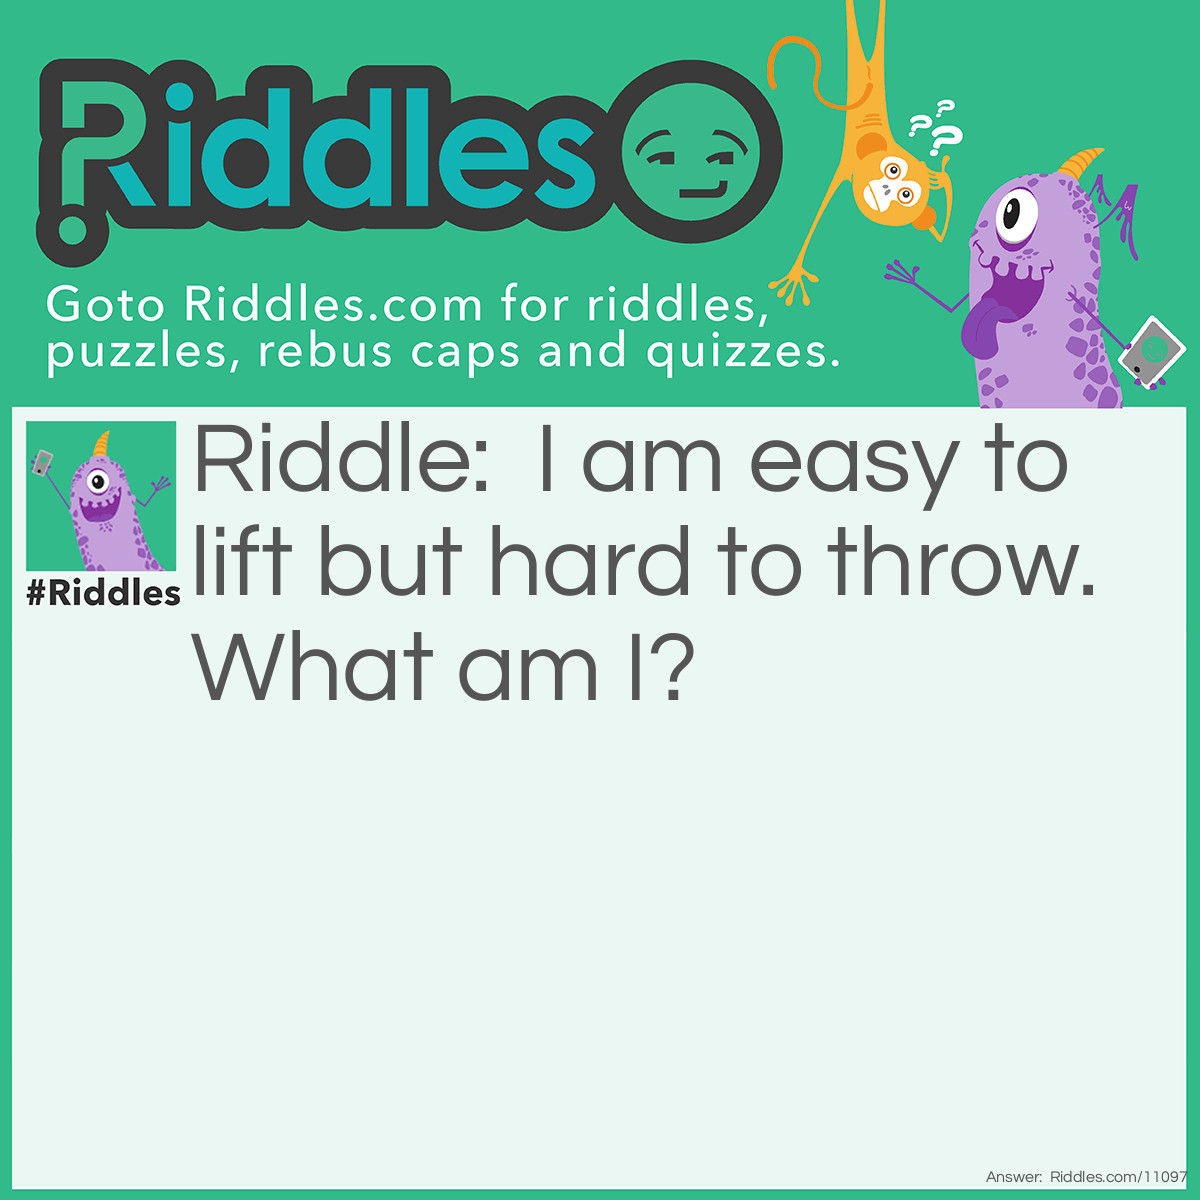 Riddle: I am easy to lift but hard to throw. What am I? Answer: A feather. (A piece of paper or a leaf would certainly qualify too!)